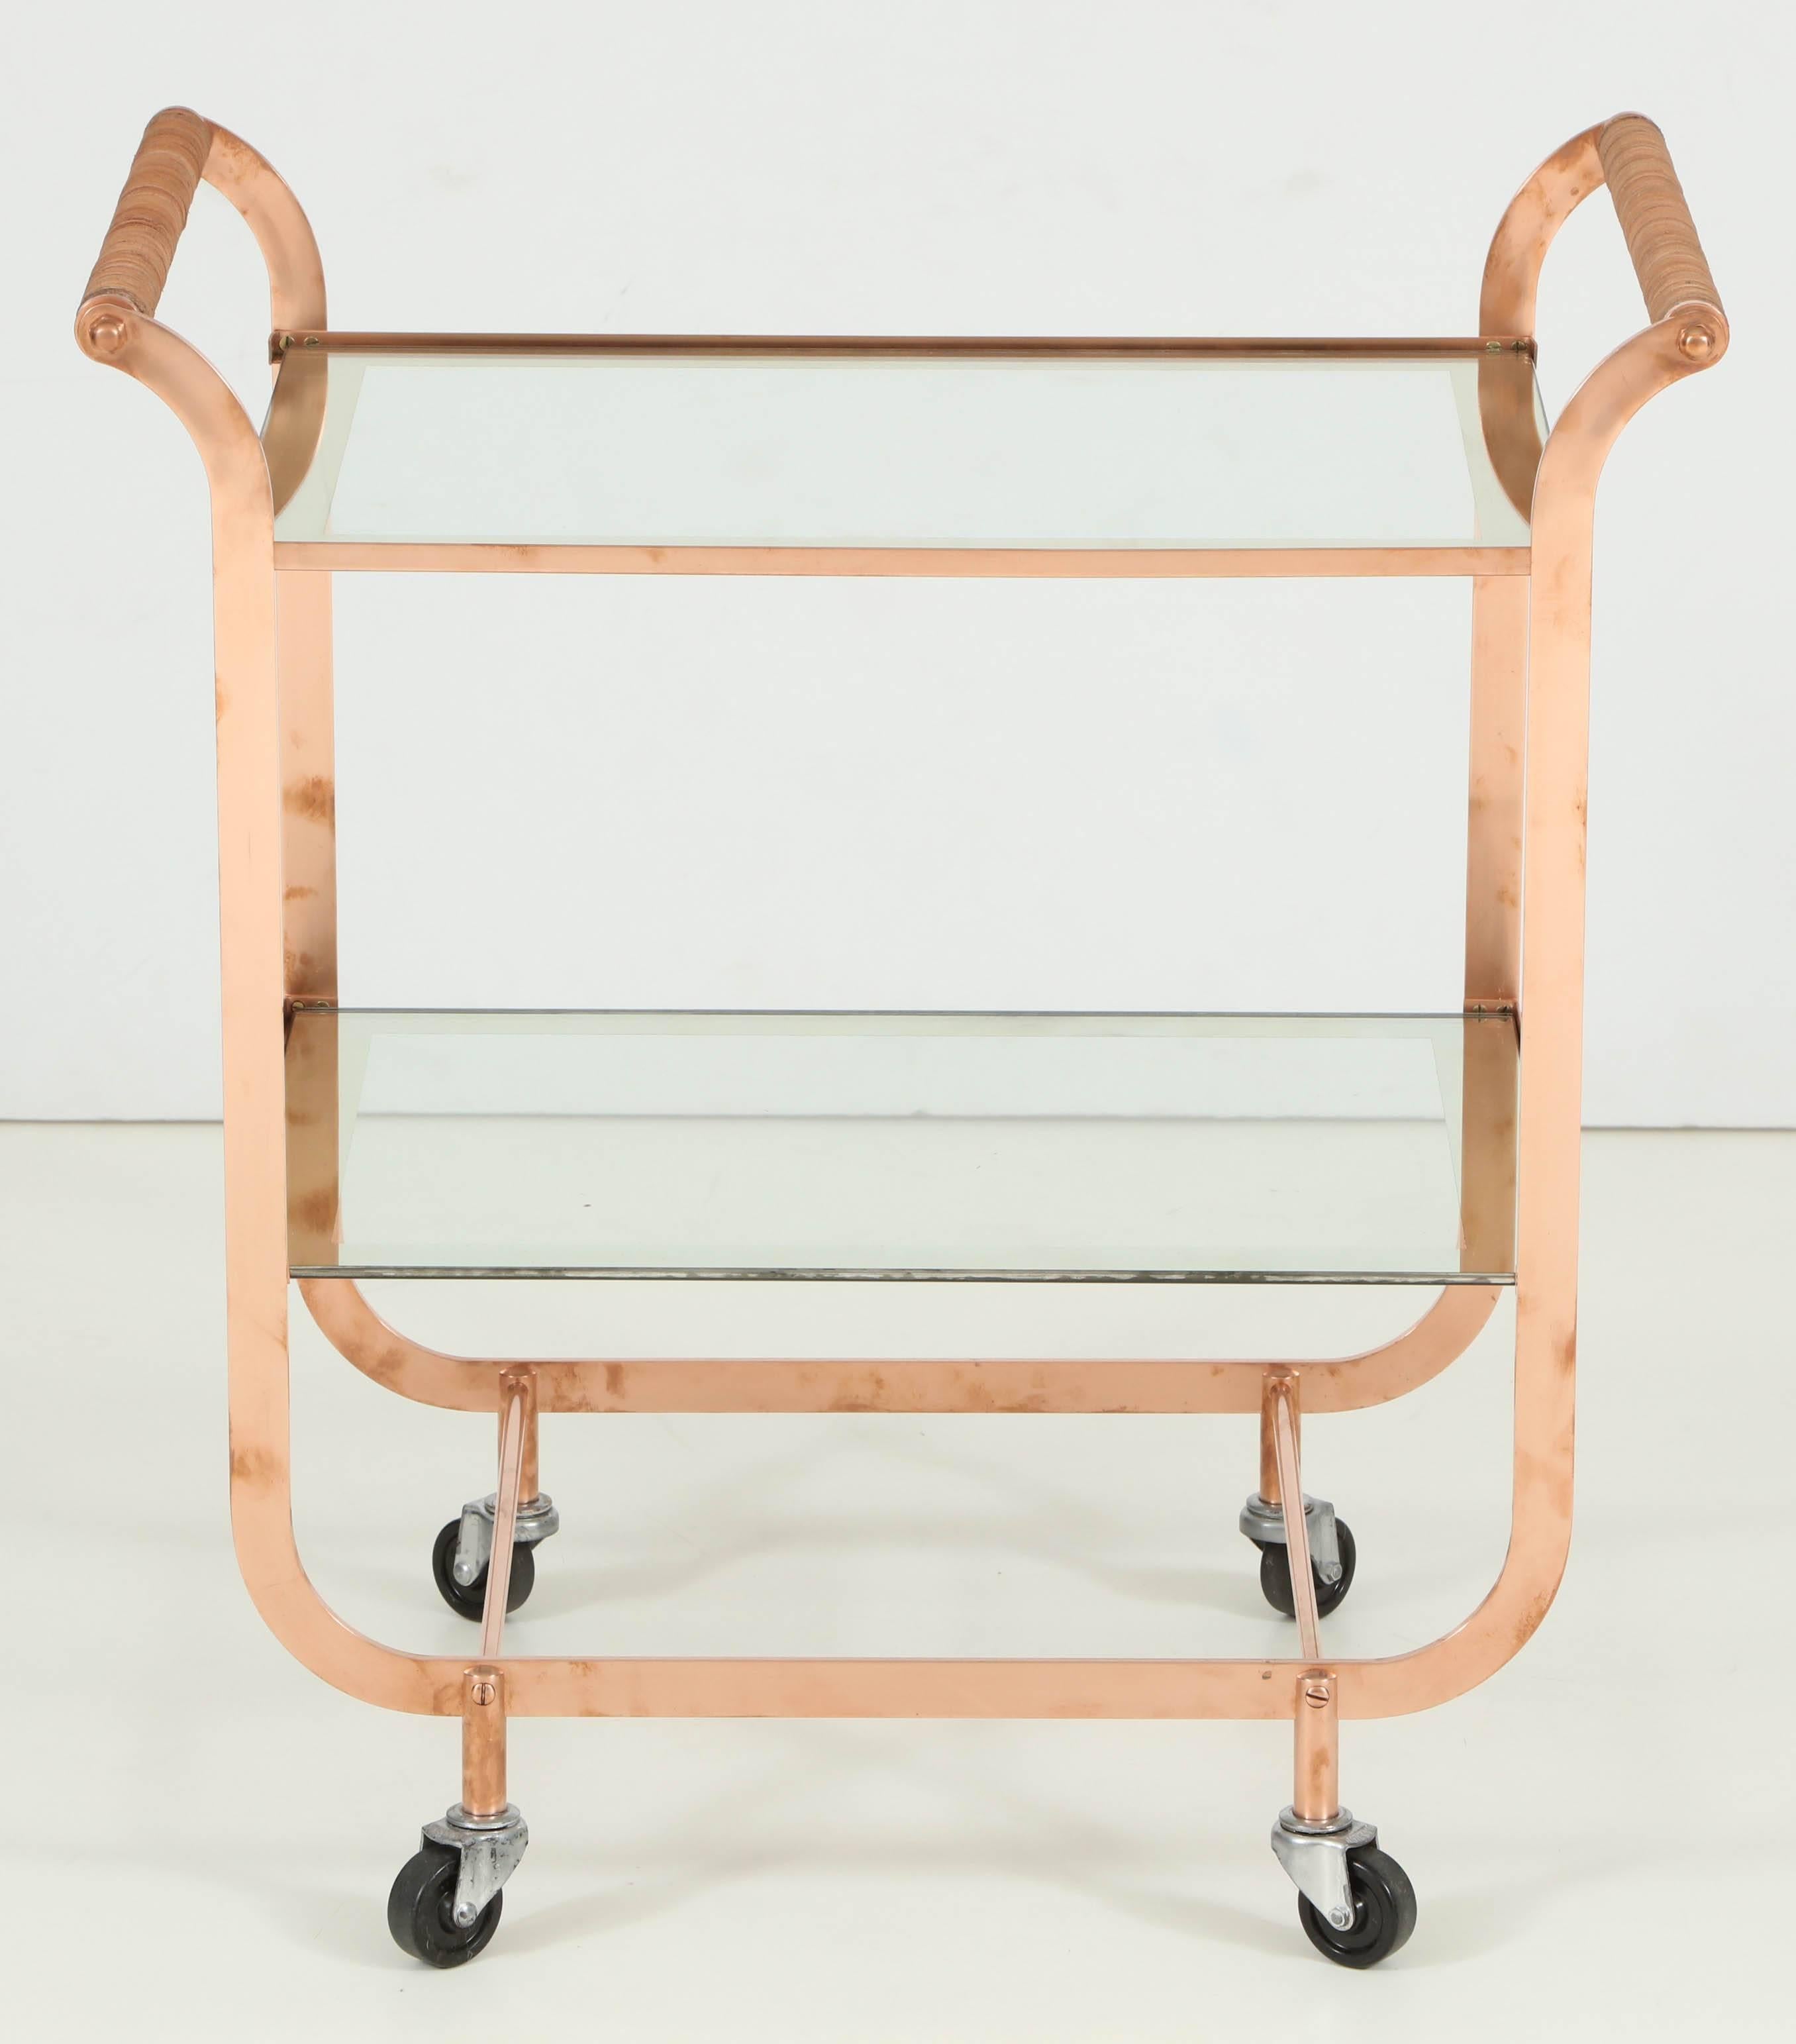 Copper bar cart from France, circa 1950. Glass has silver edges.